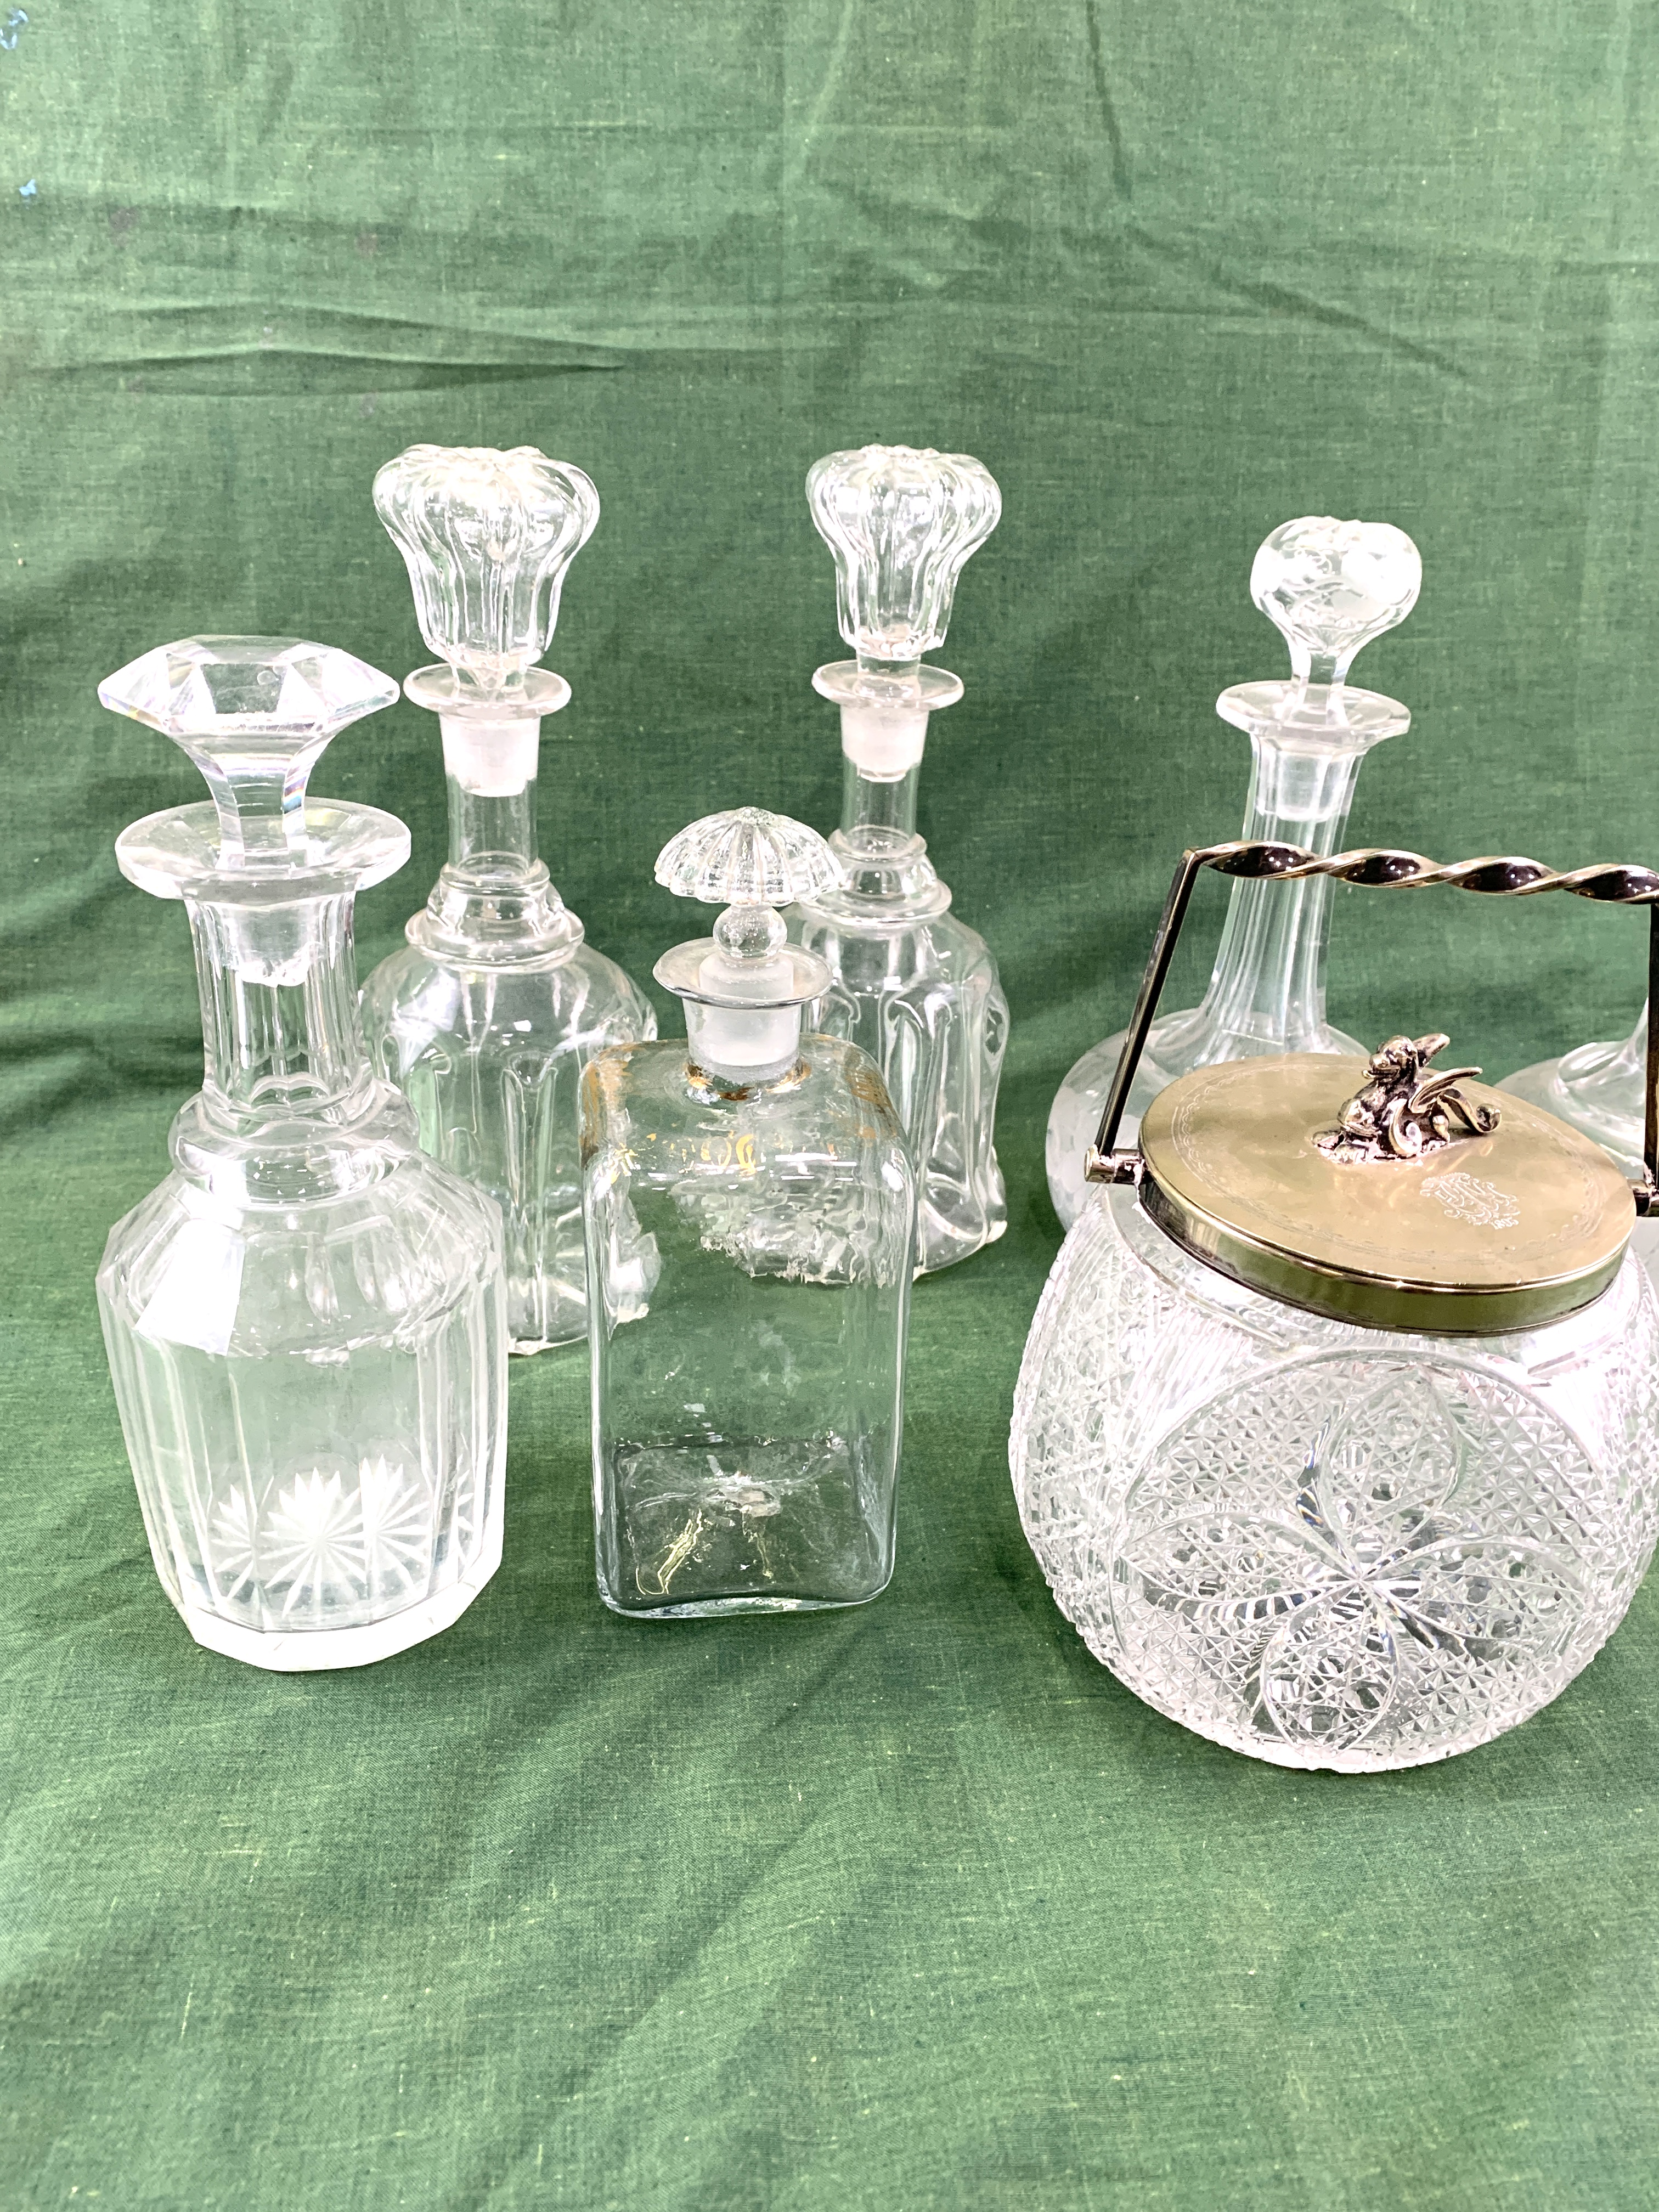 A pair of Victorian decanters, a pair of Edwardian decanters, and a cut glass biscuit barrel - Image 6 of 6